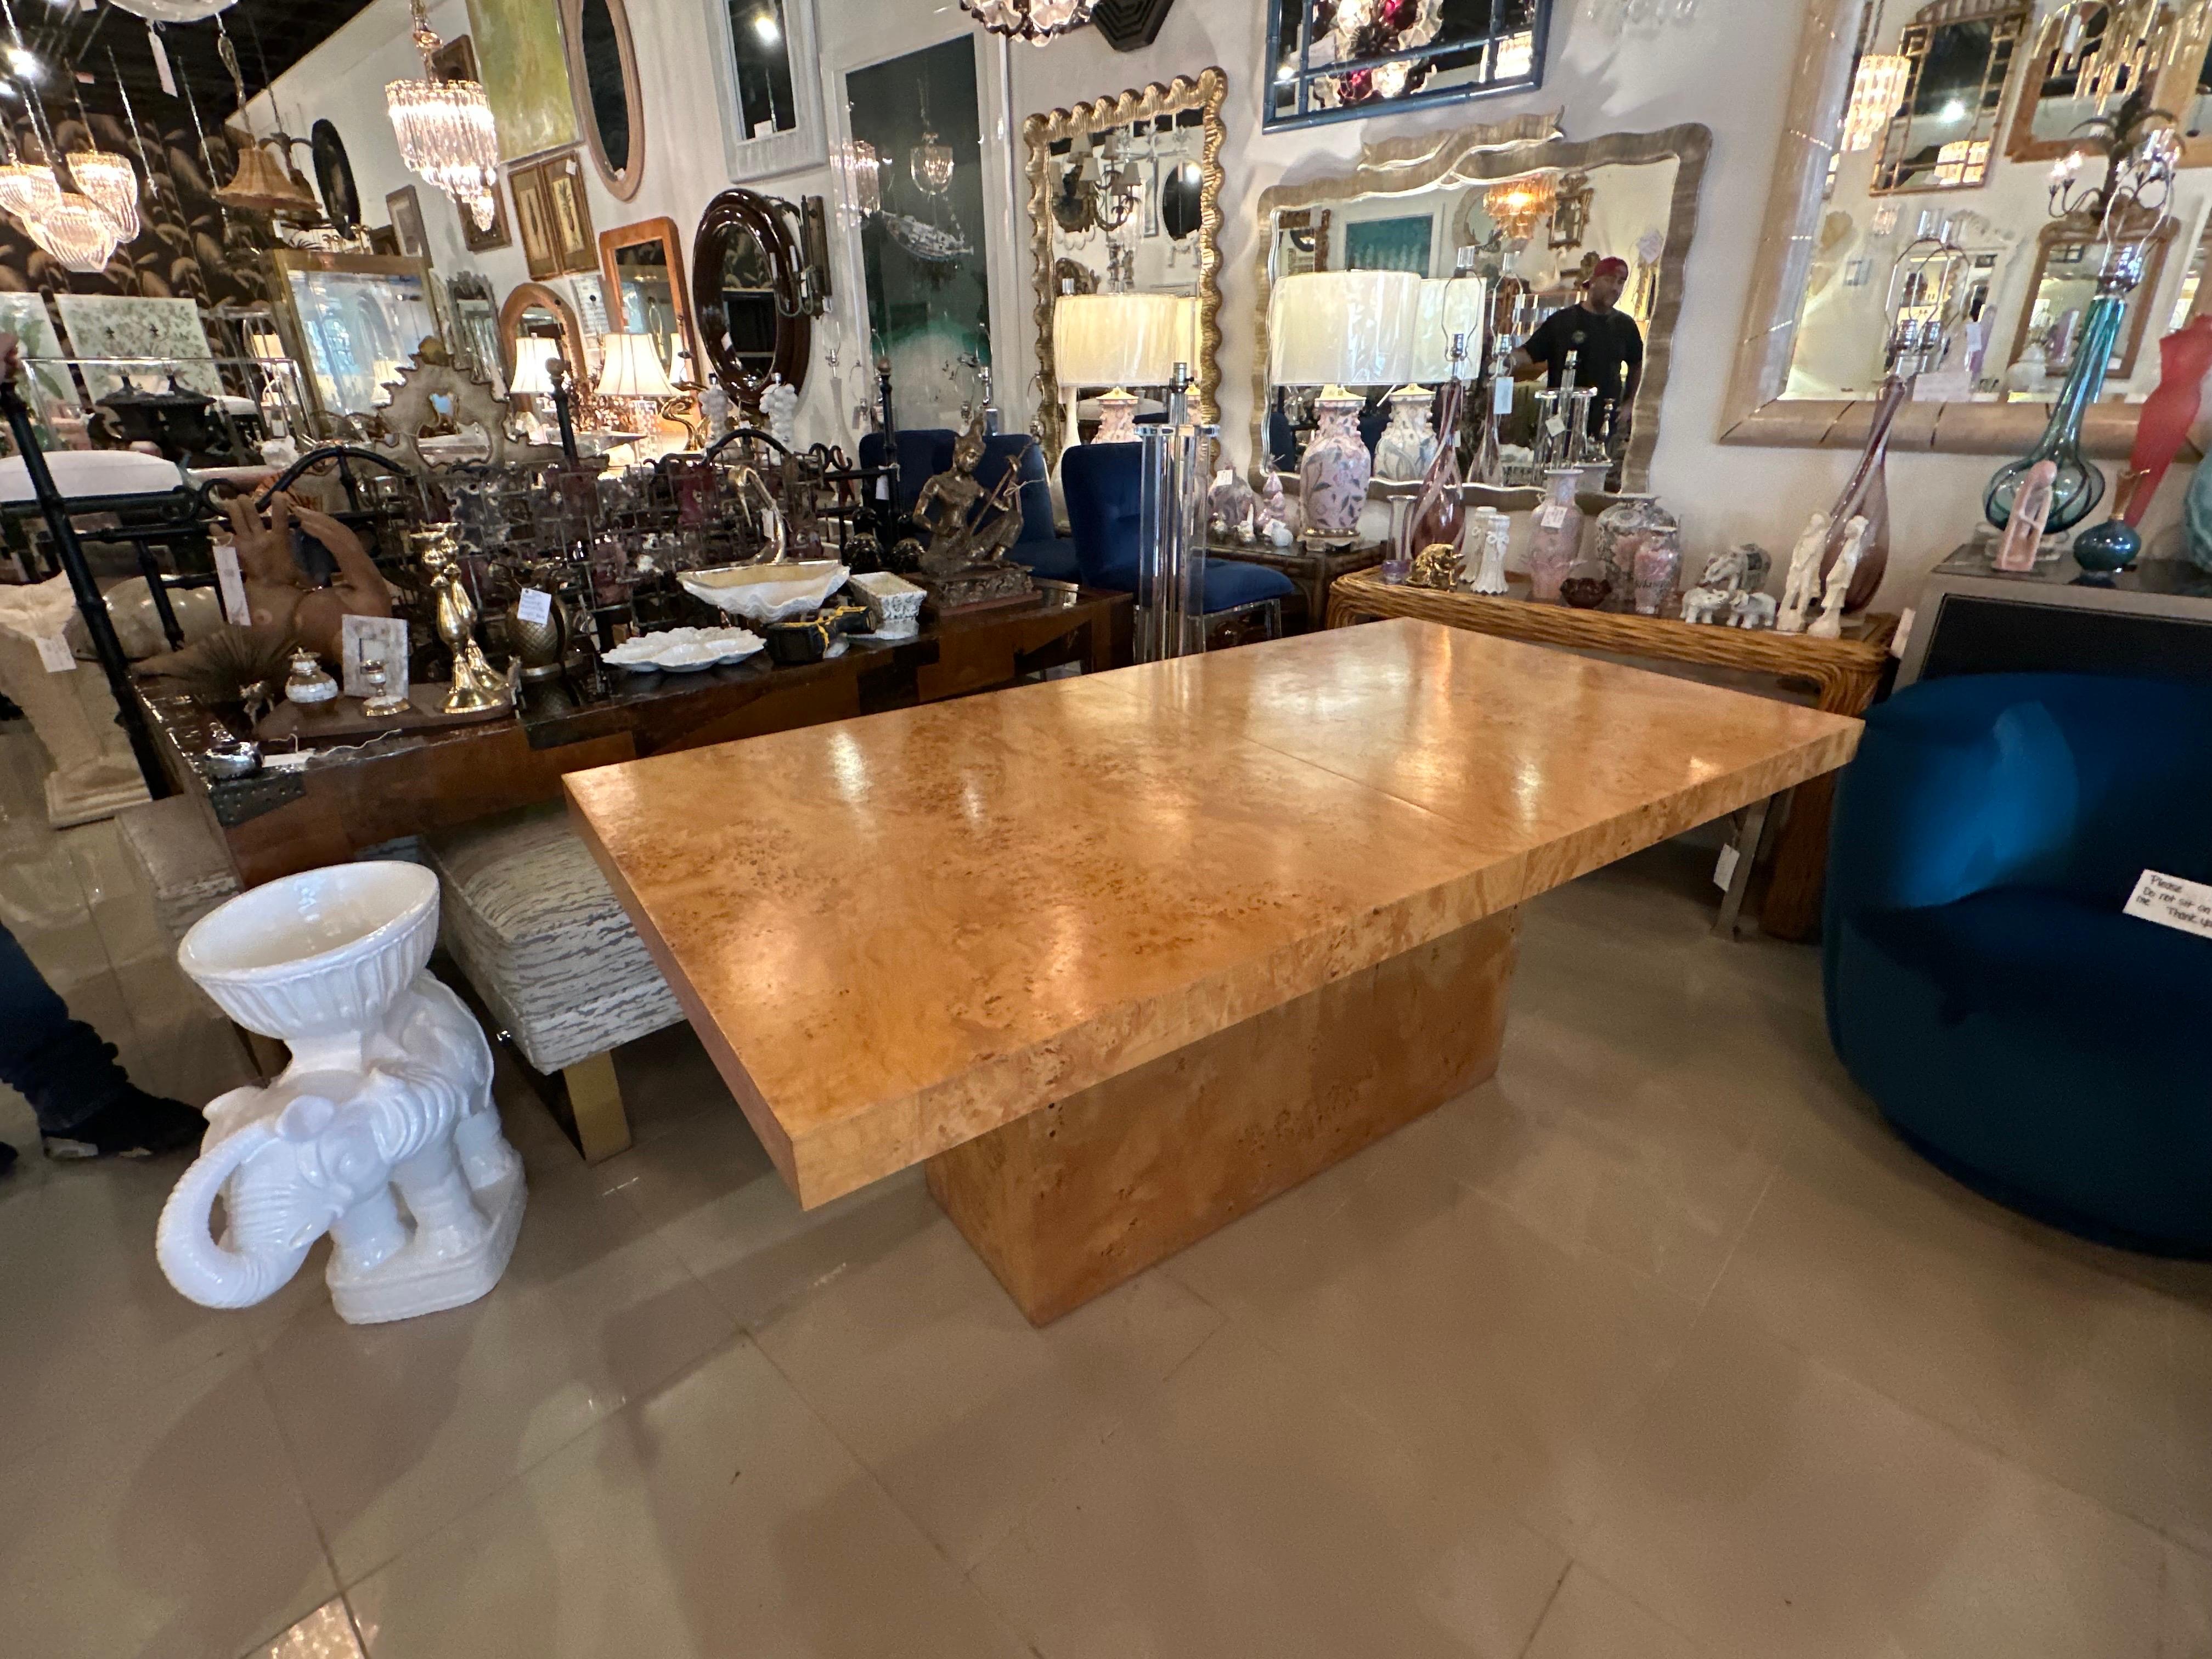 Beautiful Burled Burl Wood Olivewood dining table by Arthur Umanoff for Dillingham. This pedestal table comes with the 2 extension leaves which are housed in the pedestal base. The table closed with no leaves is 72